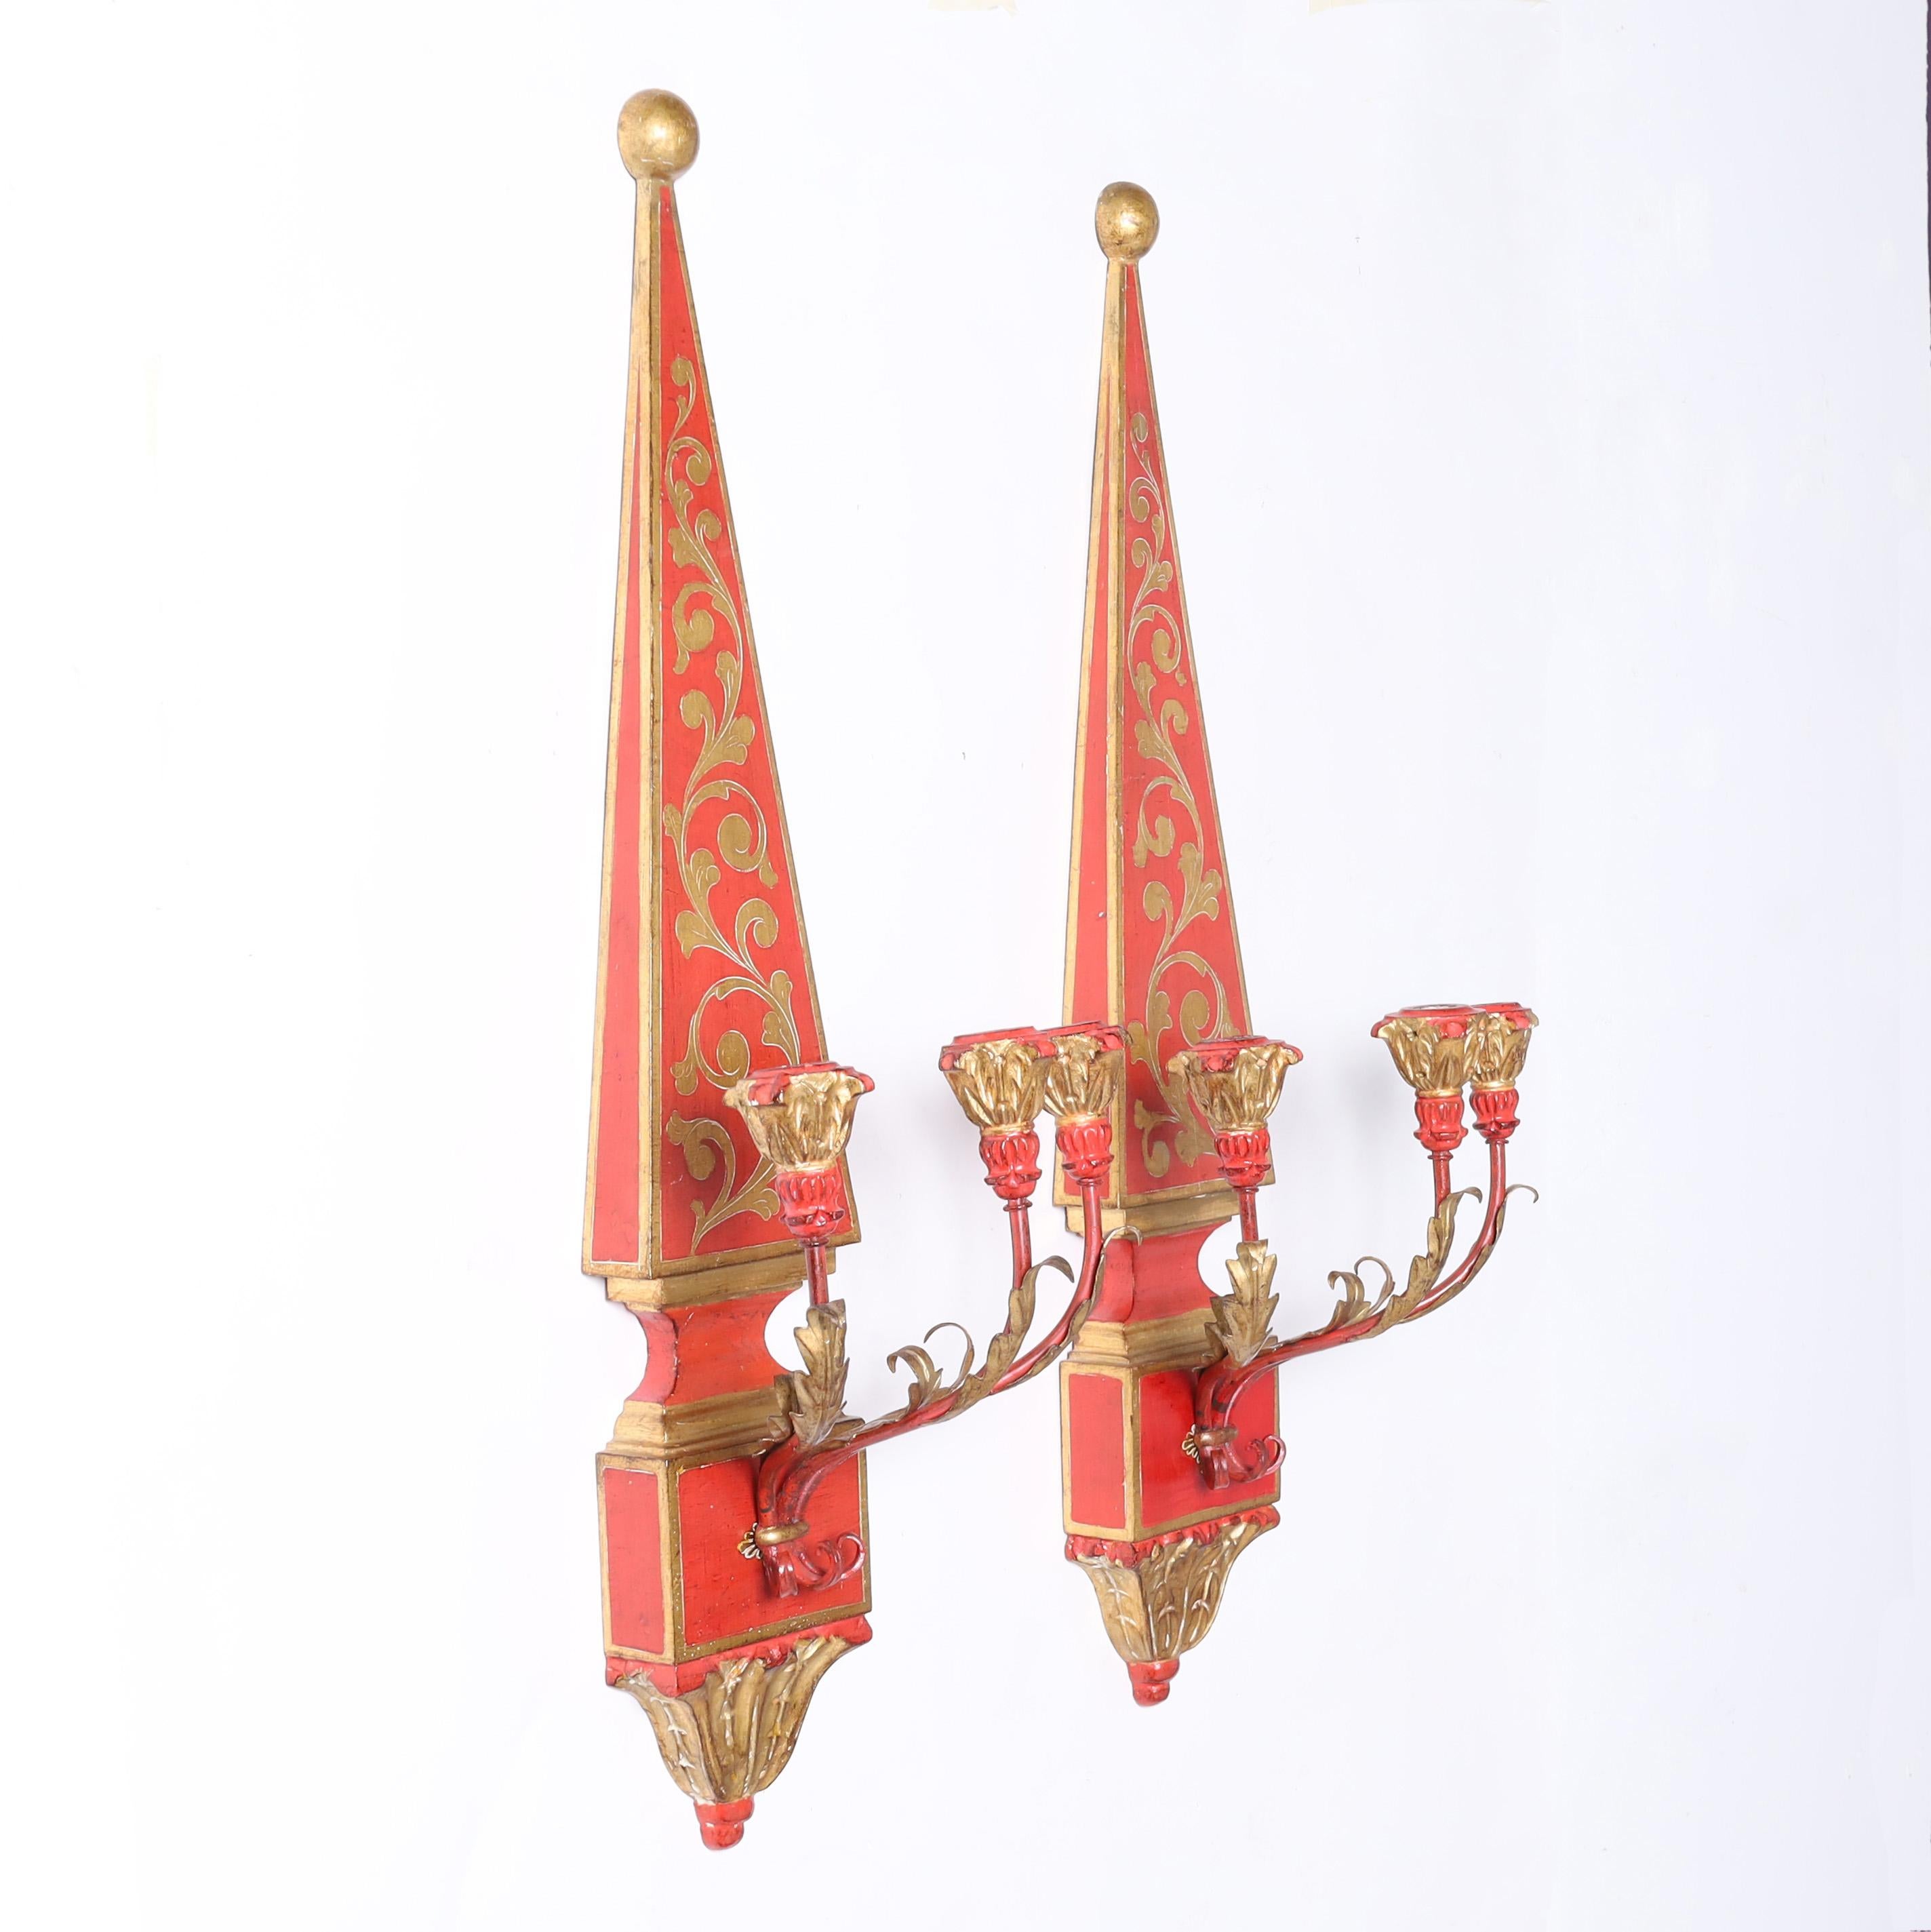 Striking pair of Italian wall sconces crafted in wood in classic form decorated with gilt floral designs over an alluring red background with three metal arms having gilt acanthus leaves and carved wood gilt candle cups.